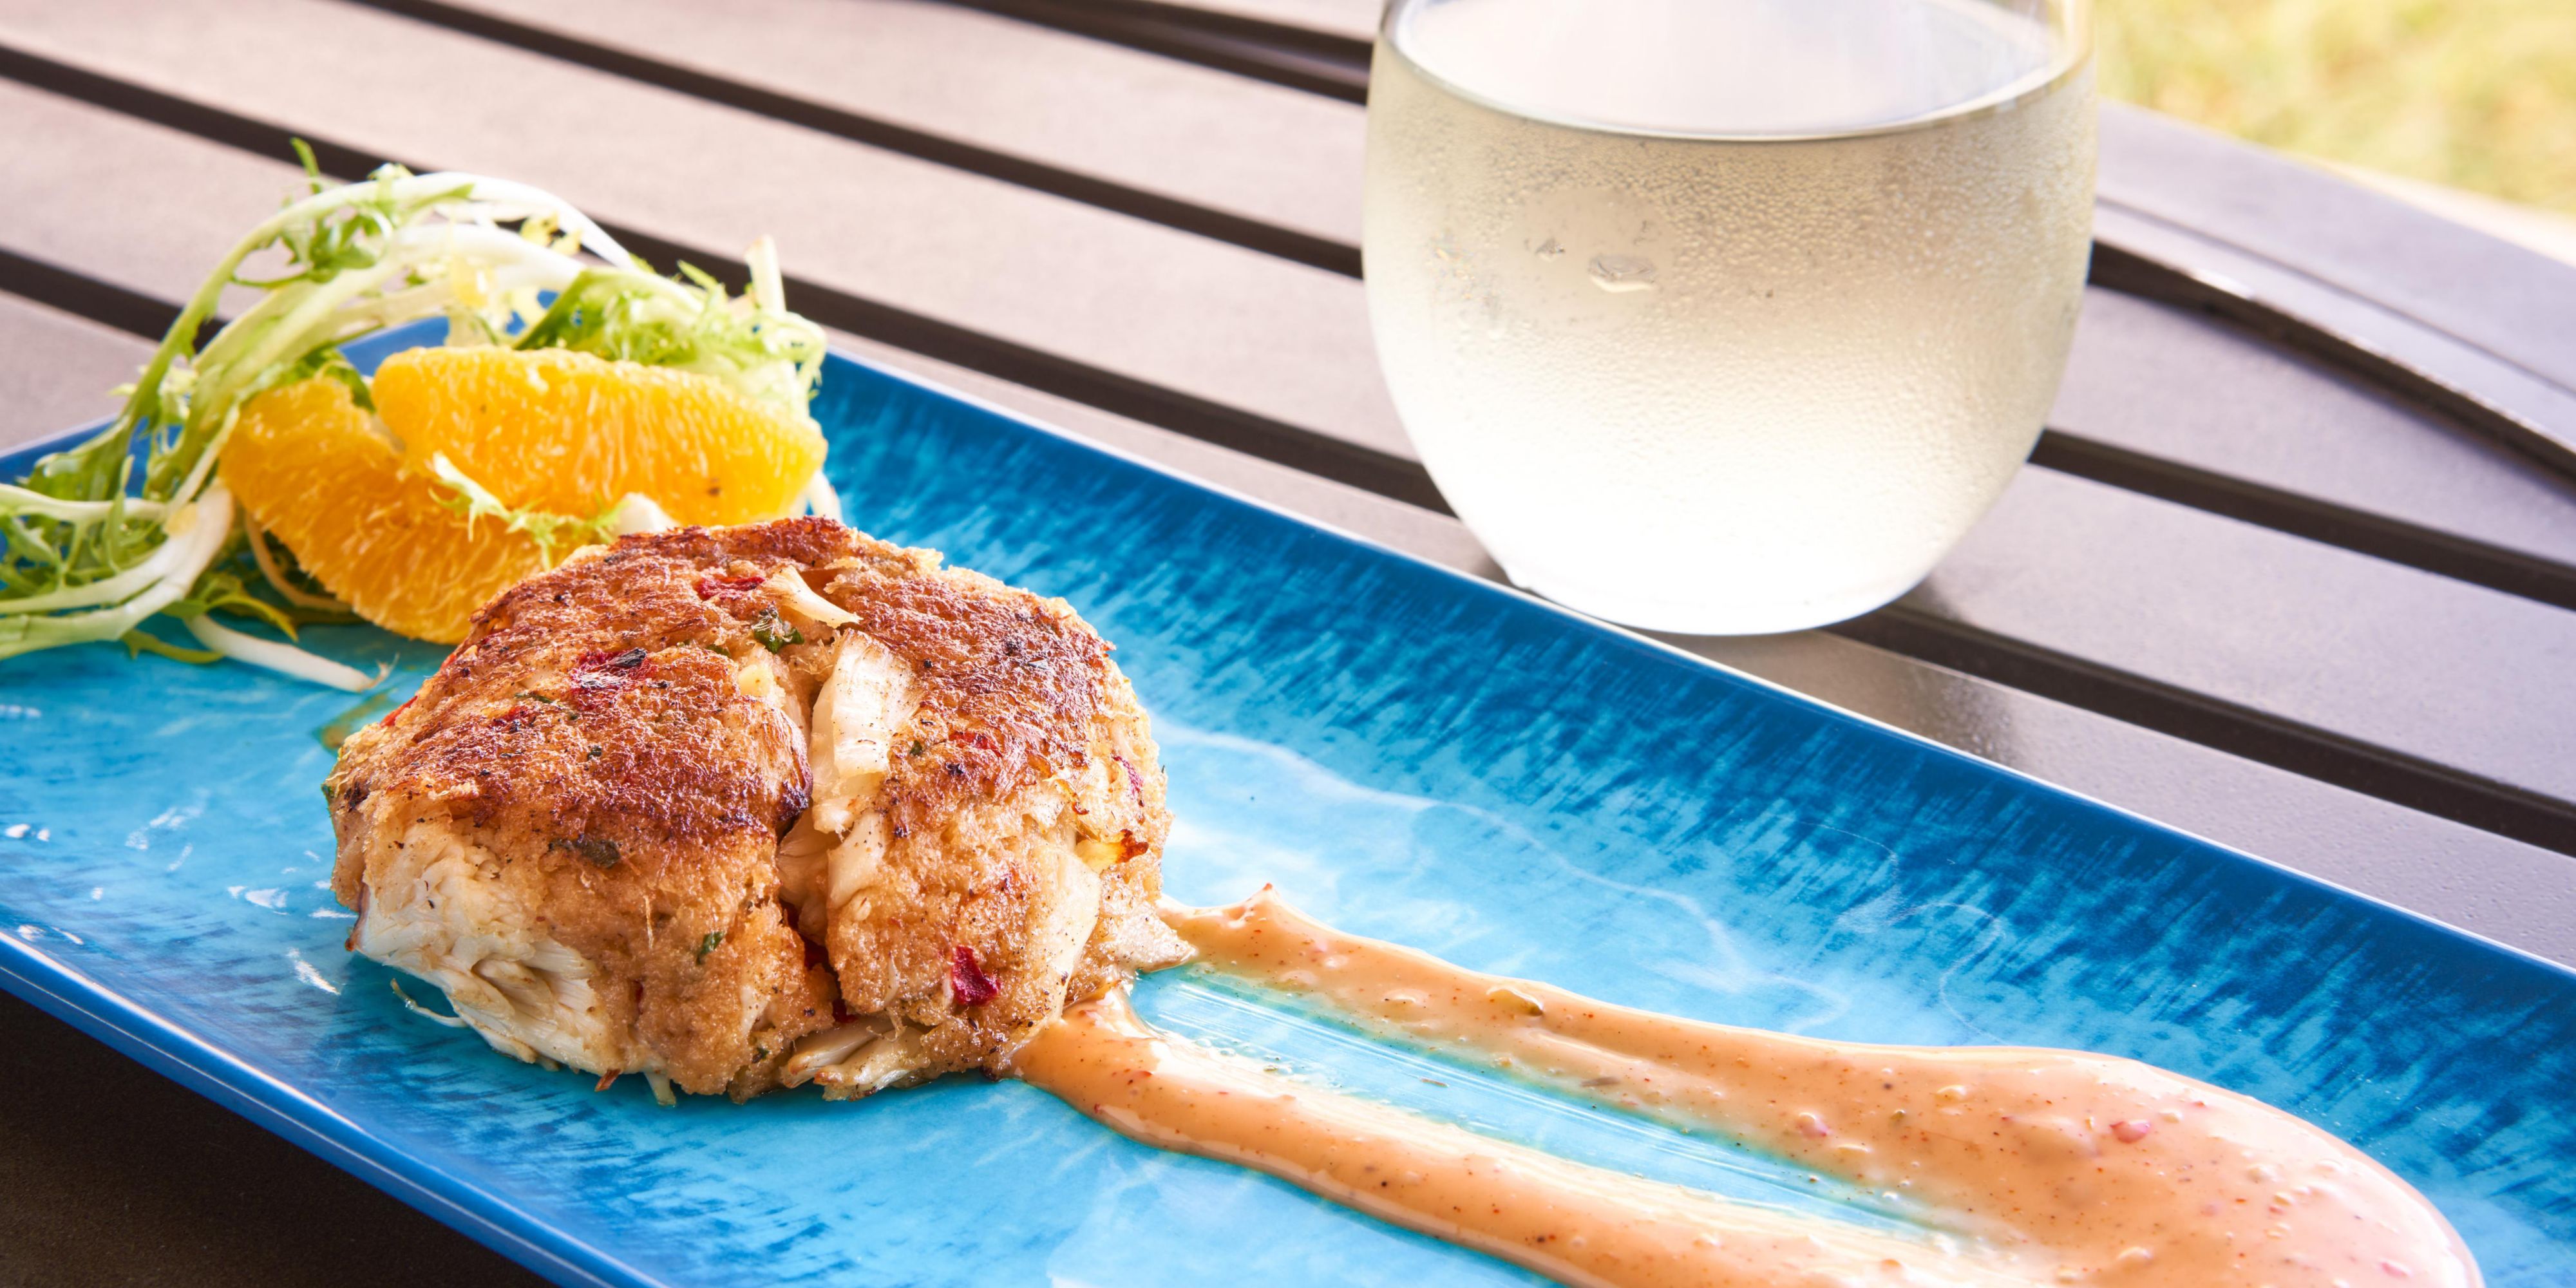 This Jumbo Crab Cake from our menu is absolutely delicious.